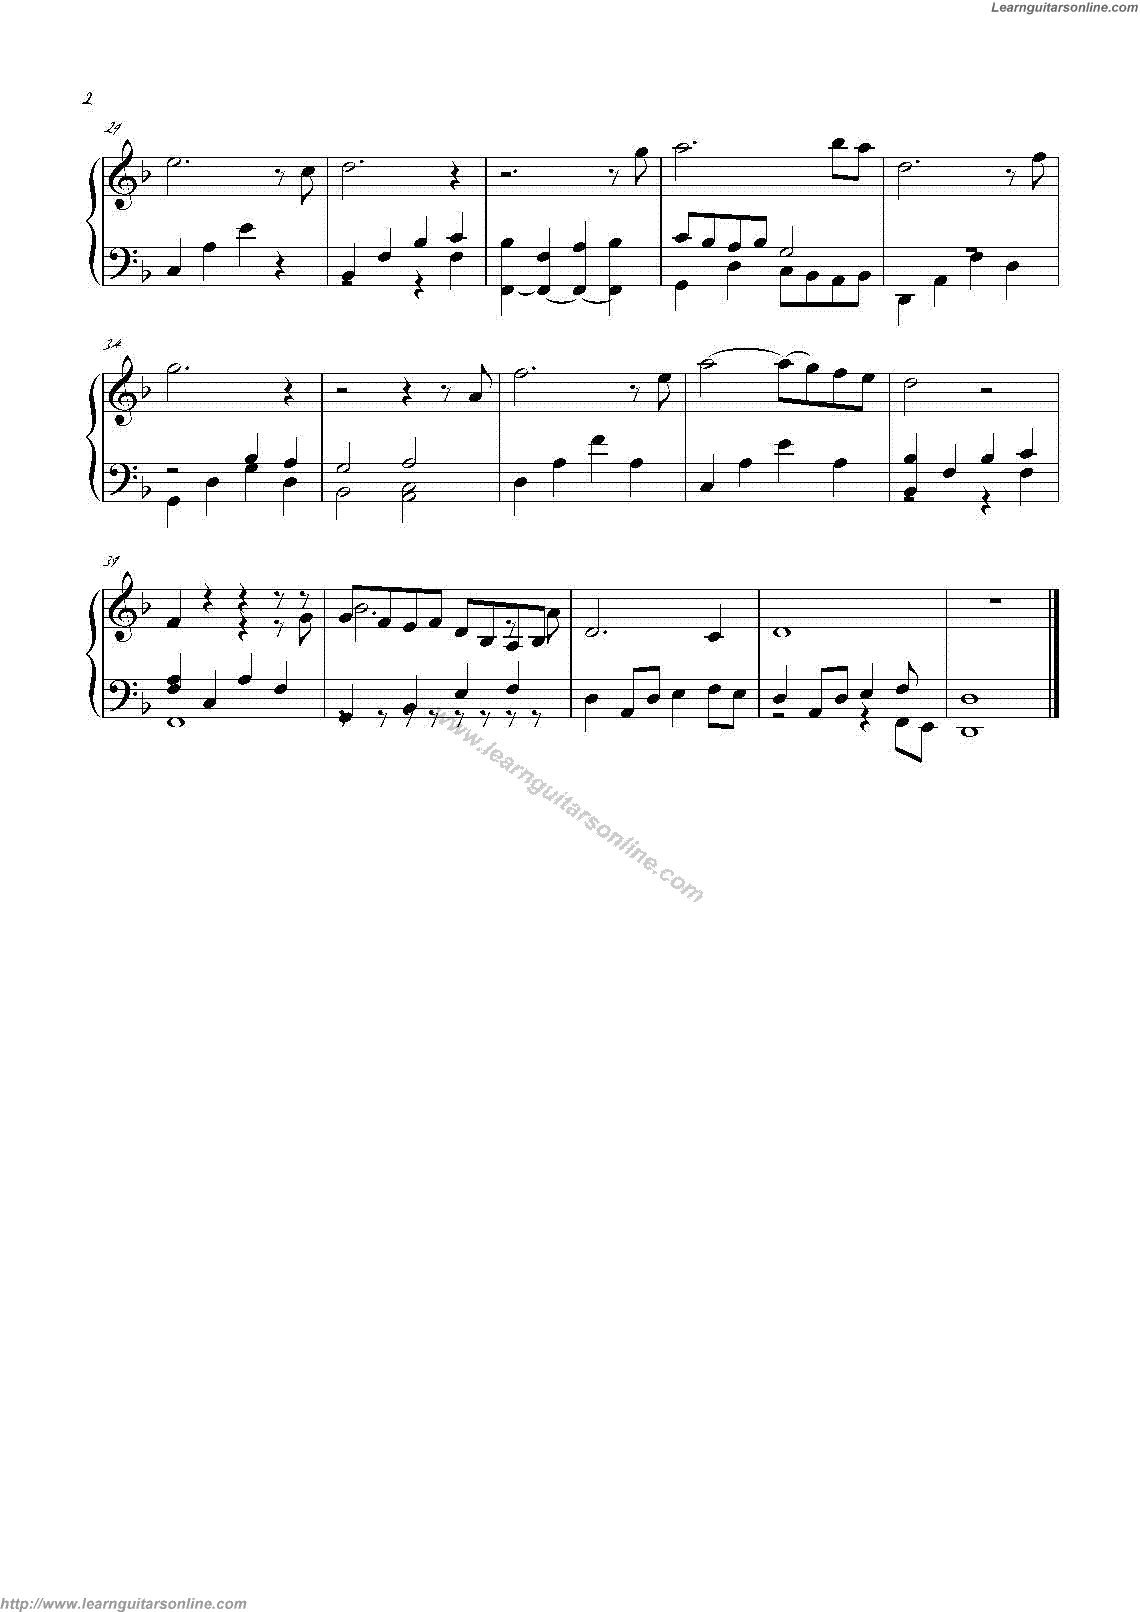 I Held The Moon by Stoa Guitar Tabs Chords Solo Notes Sheet Music Free